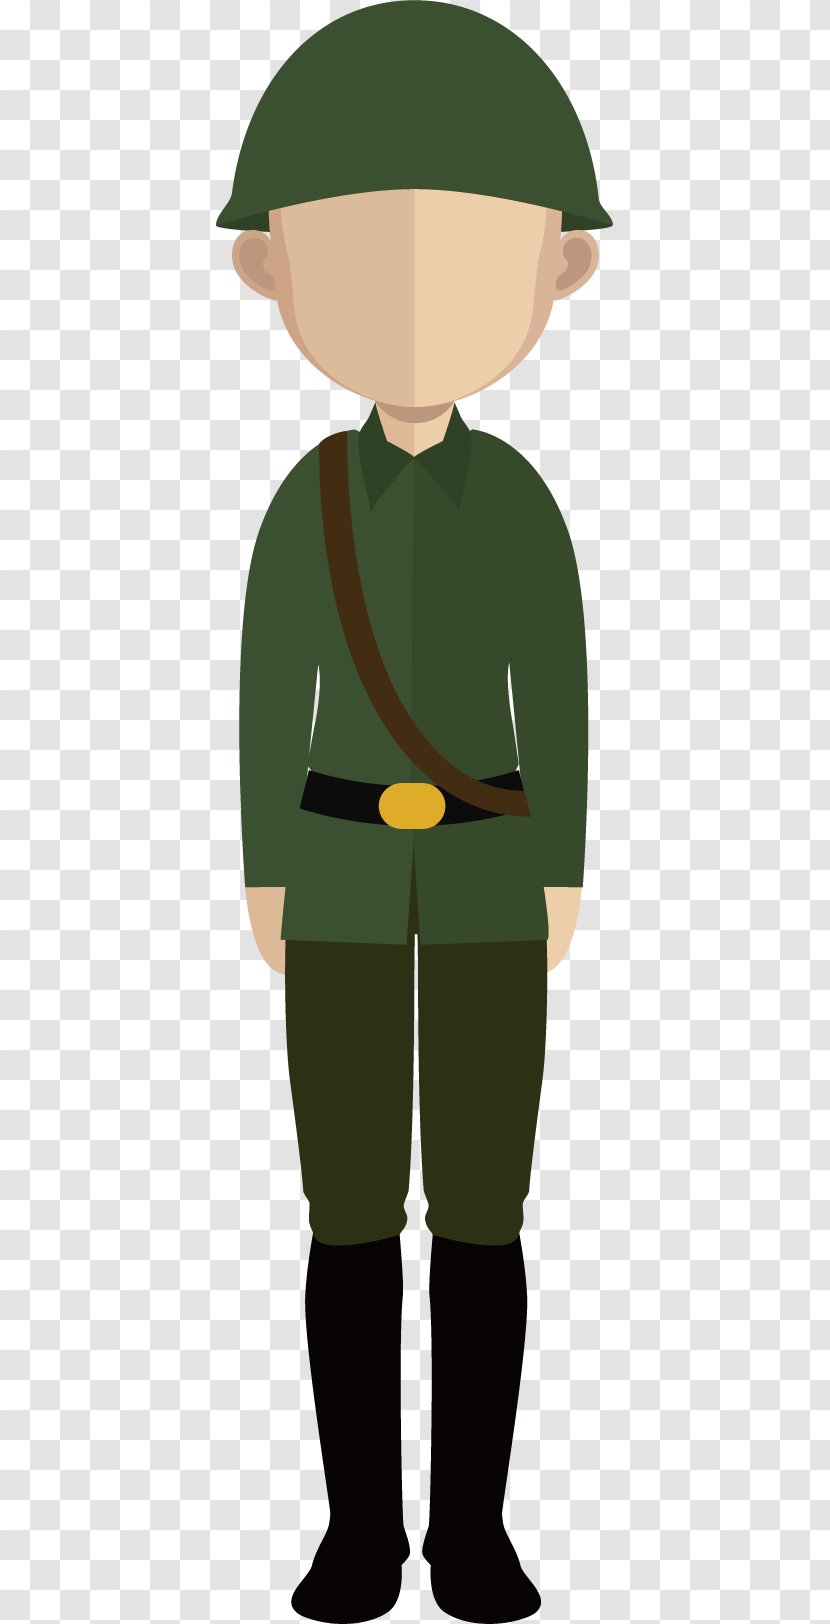 Drawing Army Animation Illustration - Soldier - The Field Transparent PNG